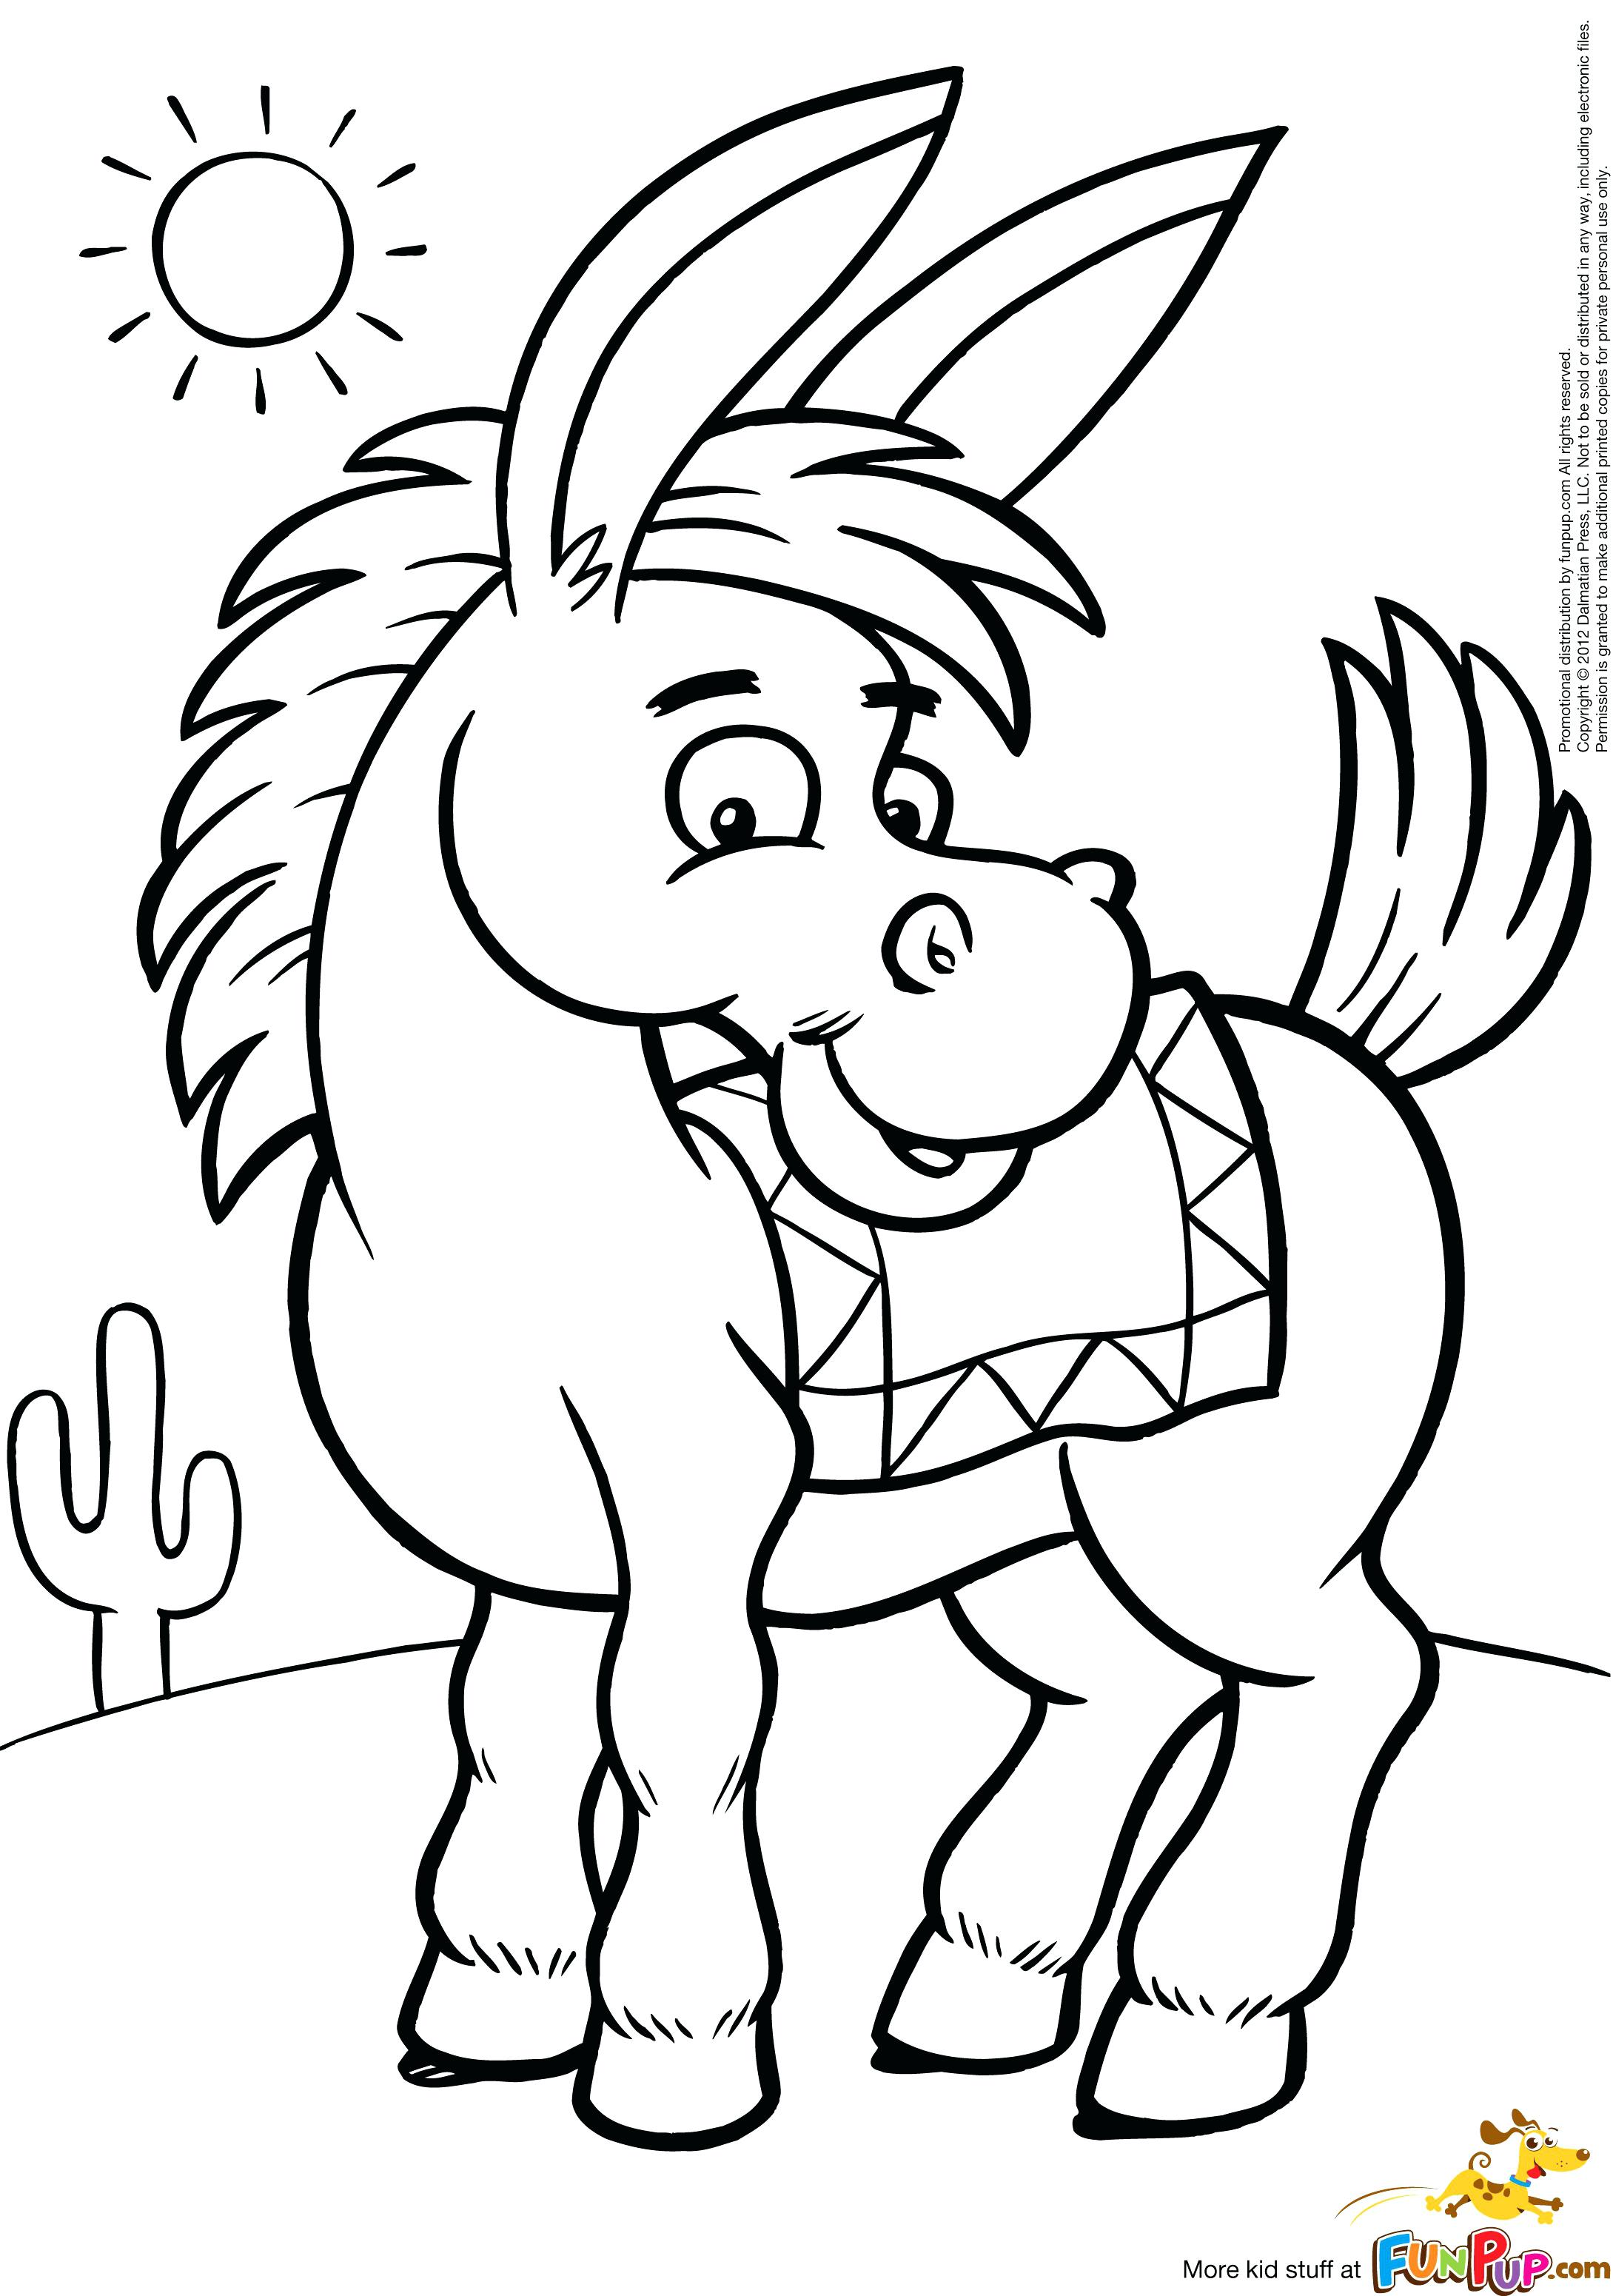 cowboy-coloring-pages-free-printable-coloring-pages-free-clip-art